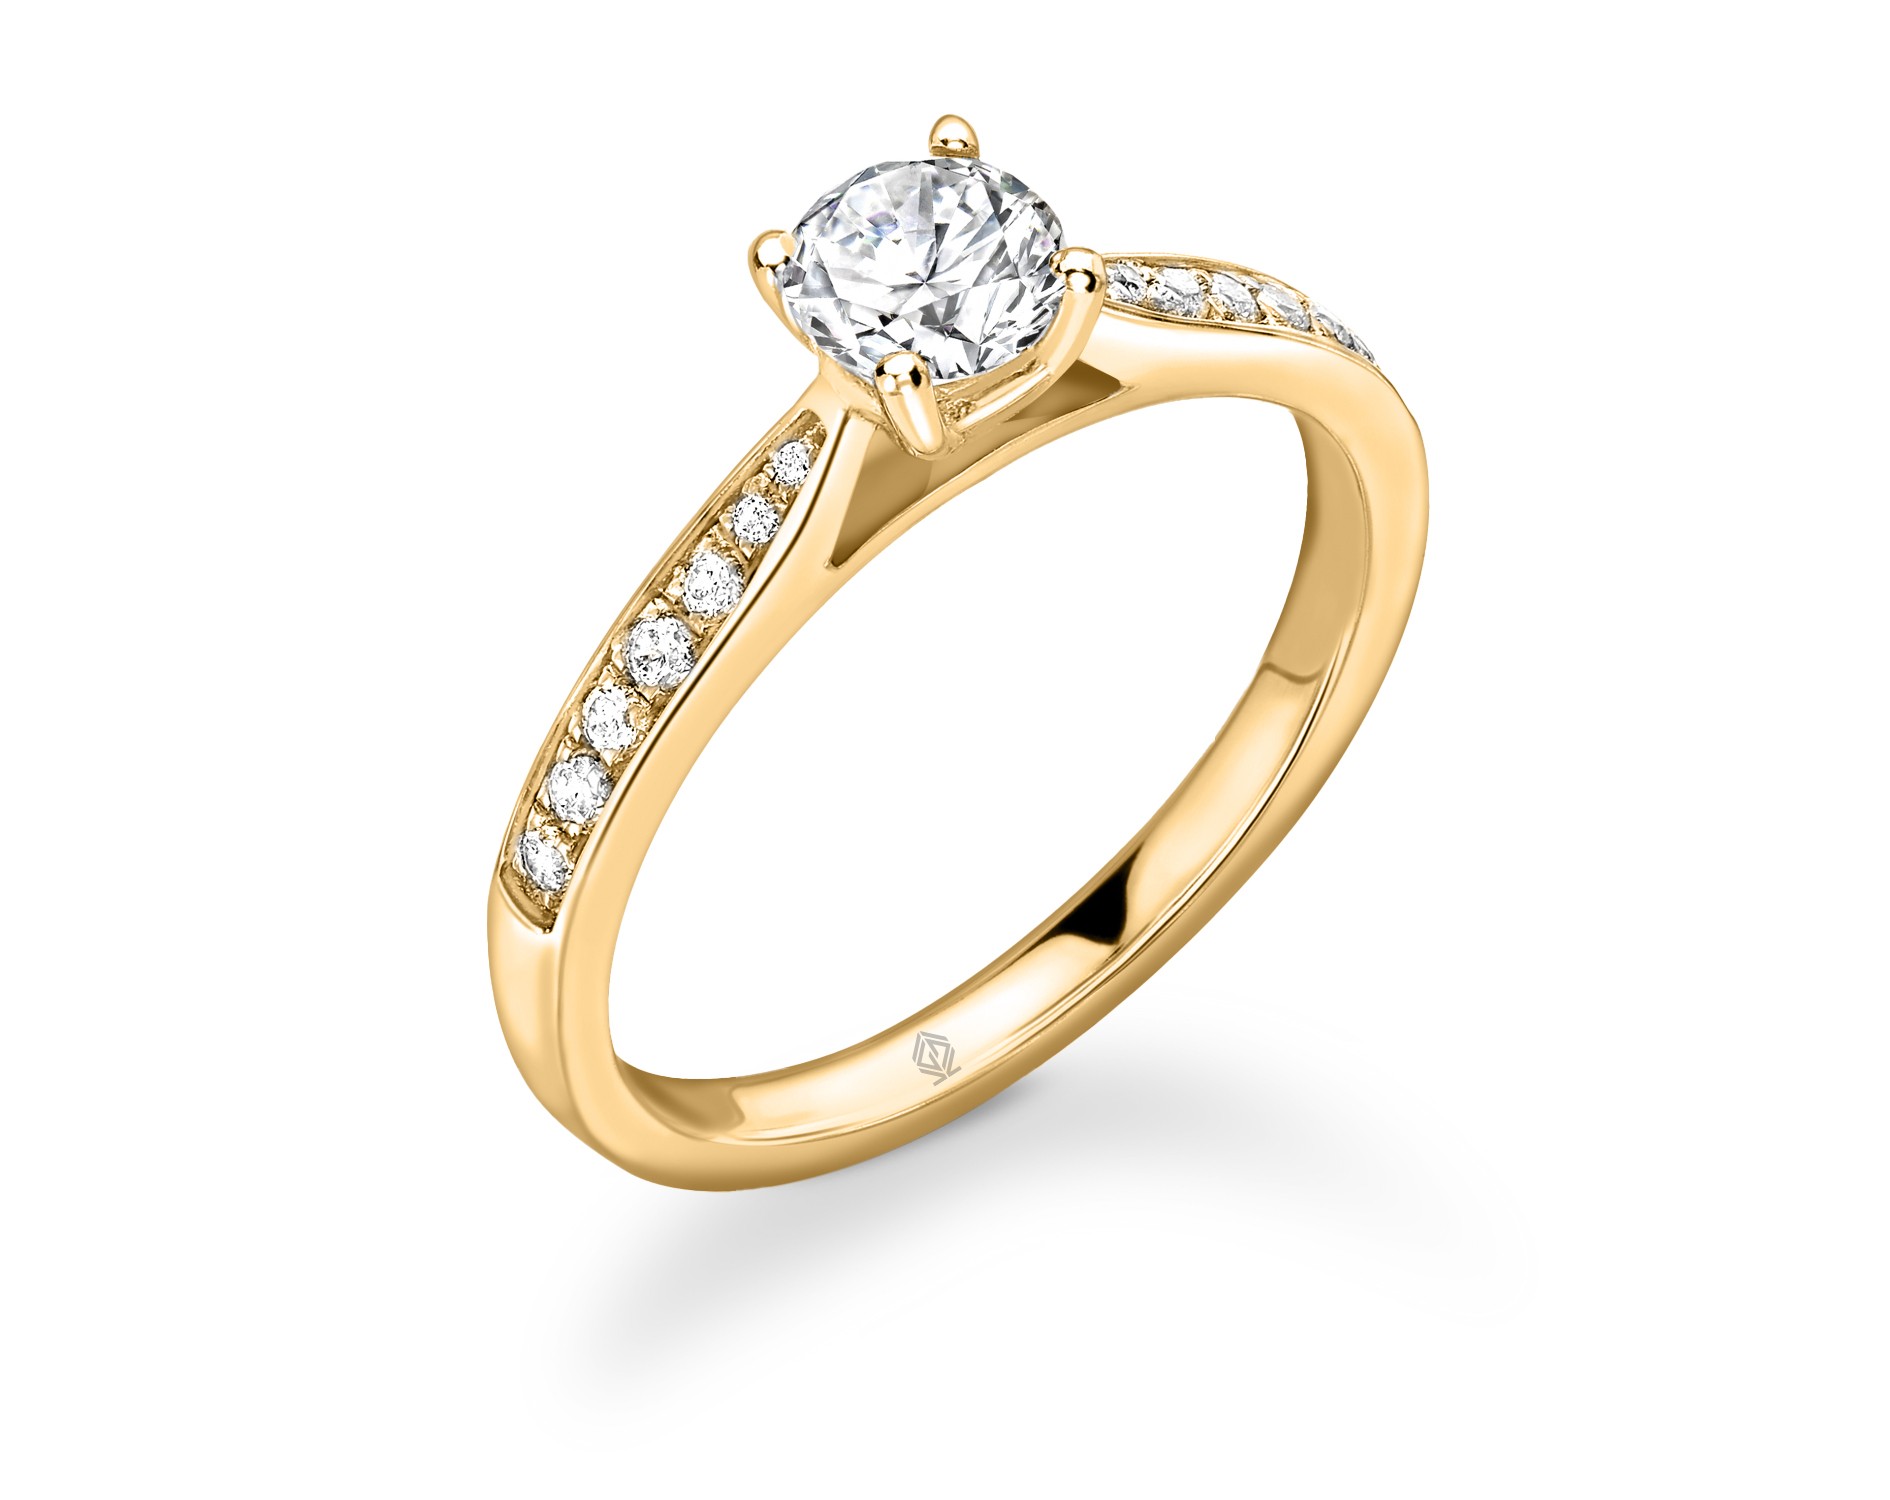 18K YELLOW GOLD ROUND CUT 4 PRONGS DIAMOND ENGAGEMENT RING SIDE STONES WITH CHANNEL SET